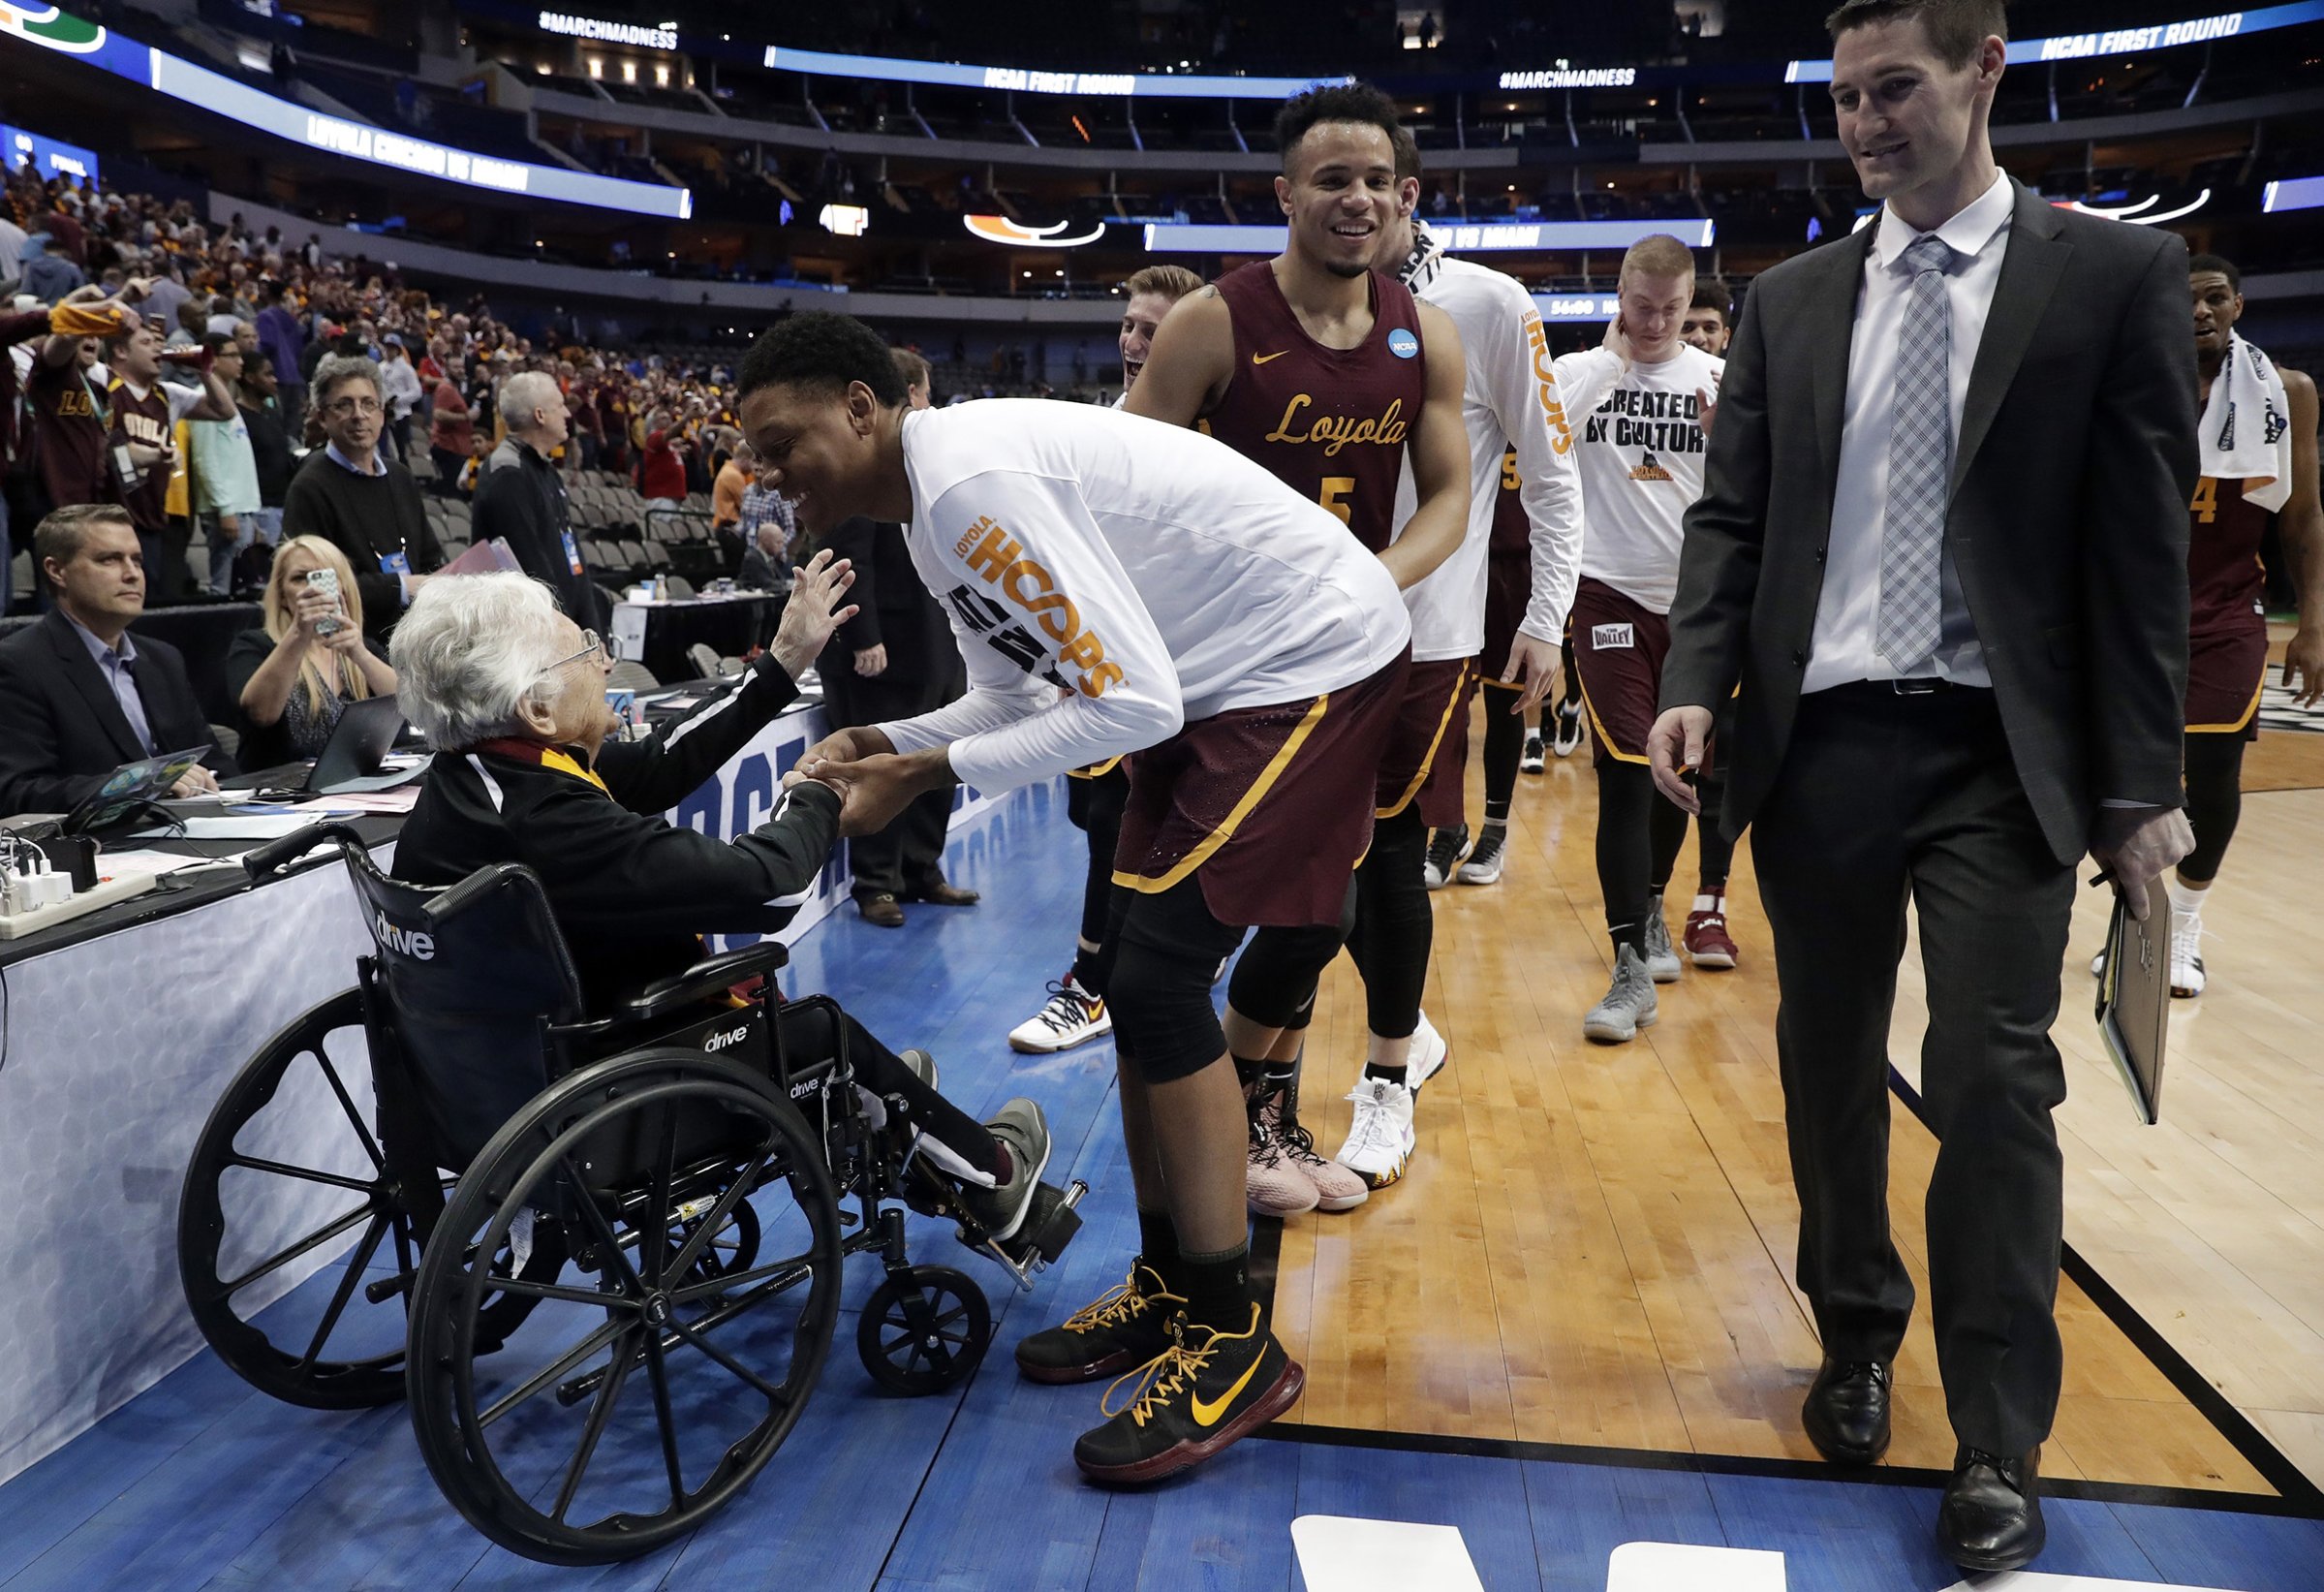 Sister Jean, the 98-year-old team chaplain for Loyola-Chicago, greets players after a win